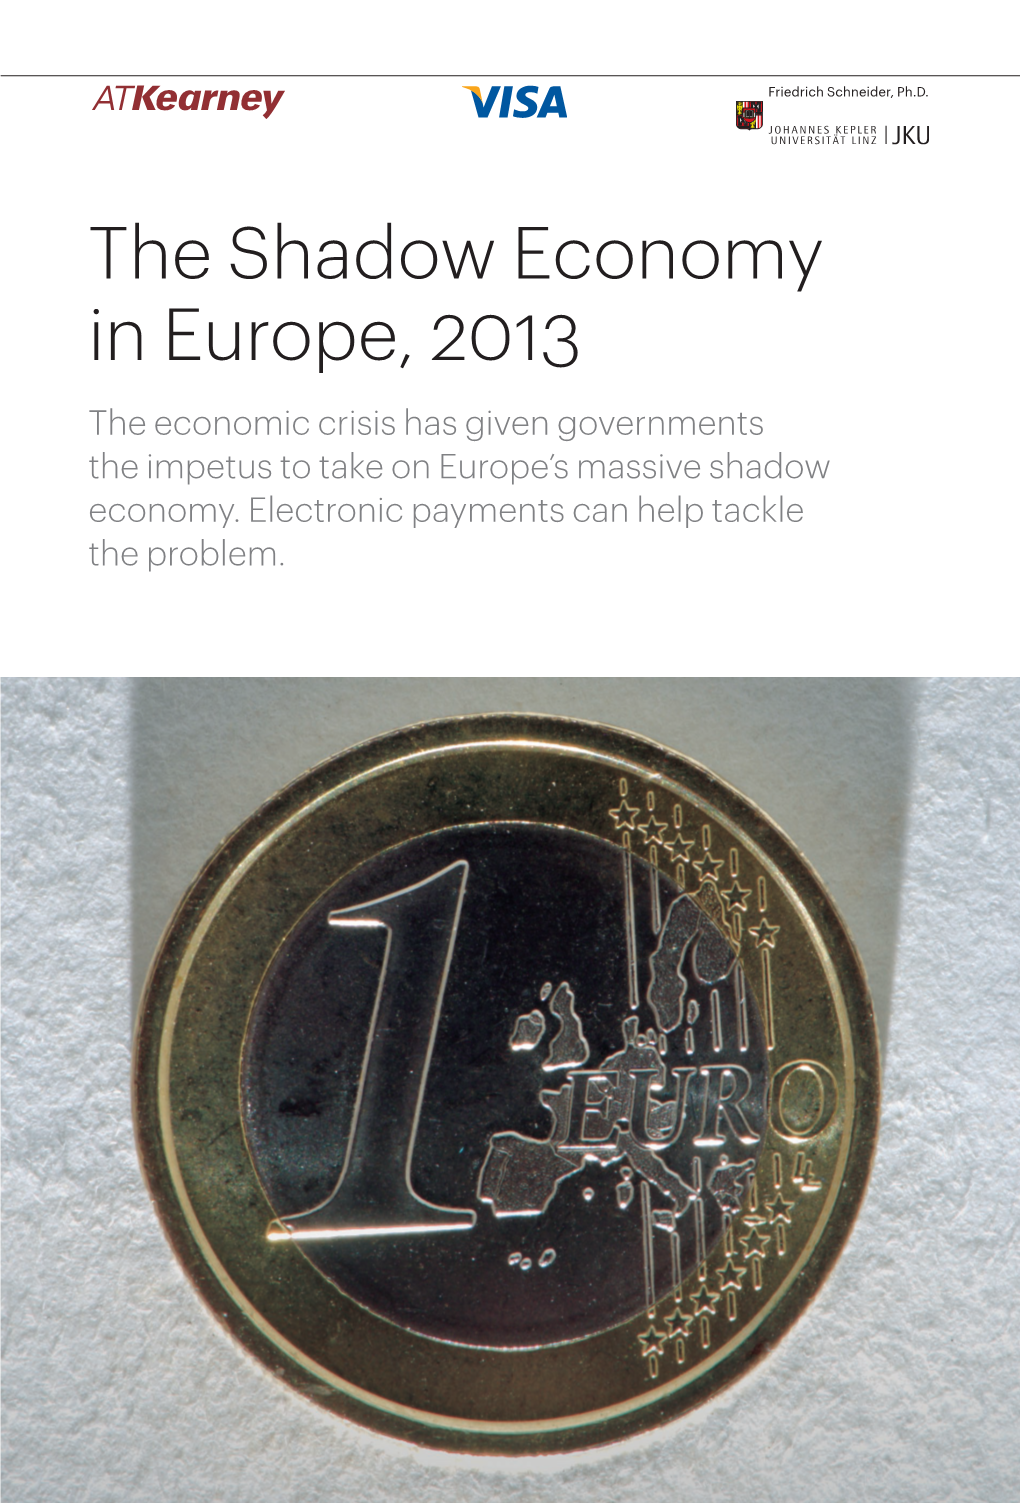 The Shadow Economy in Europe, 2013 the Economic Crisis Has Given Governments the Impetus to Take on Europe’S Massive Shadow Economy